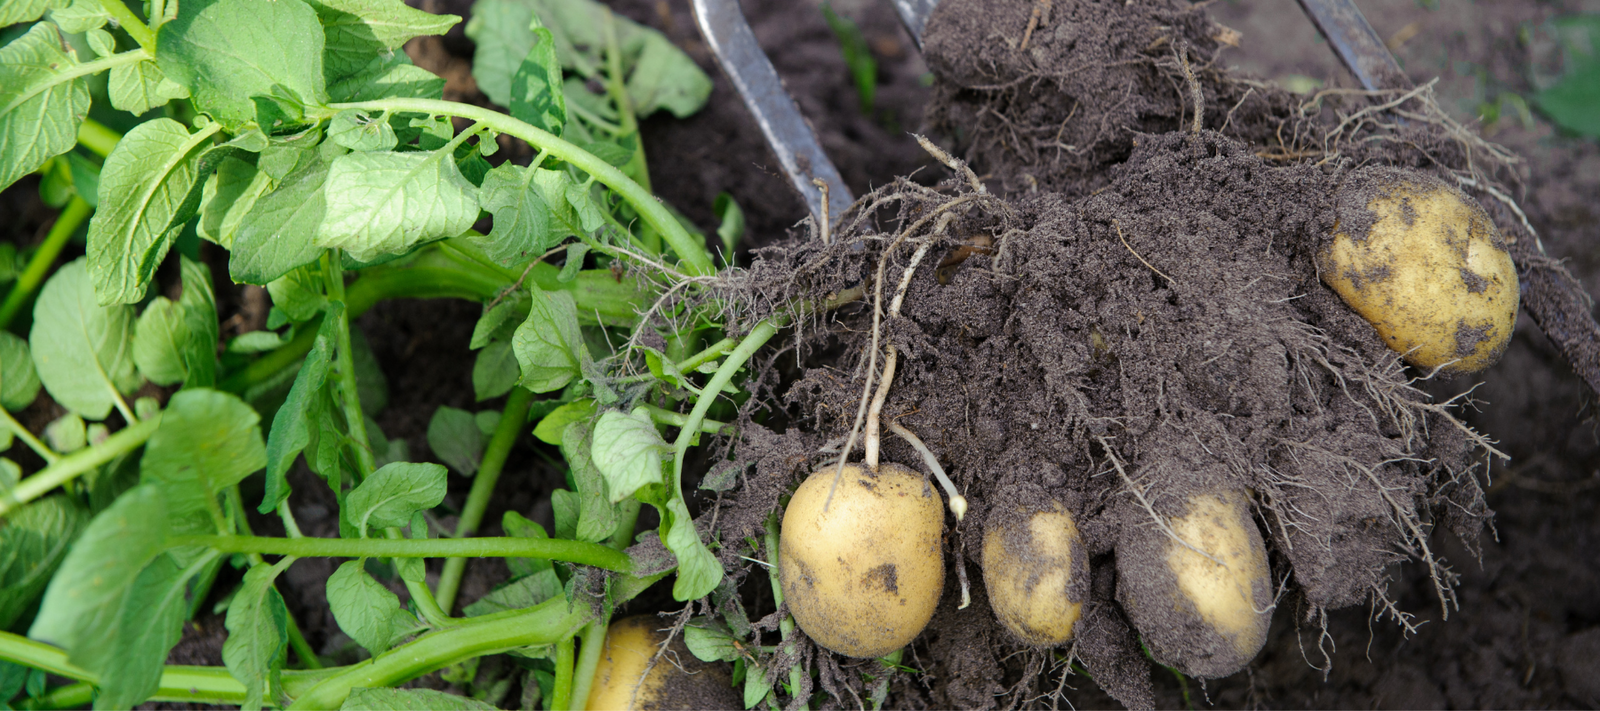 How To Grow Potatoes in A Bag 